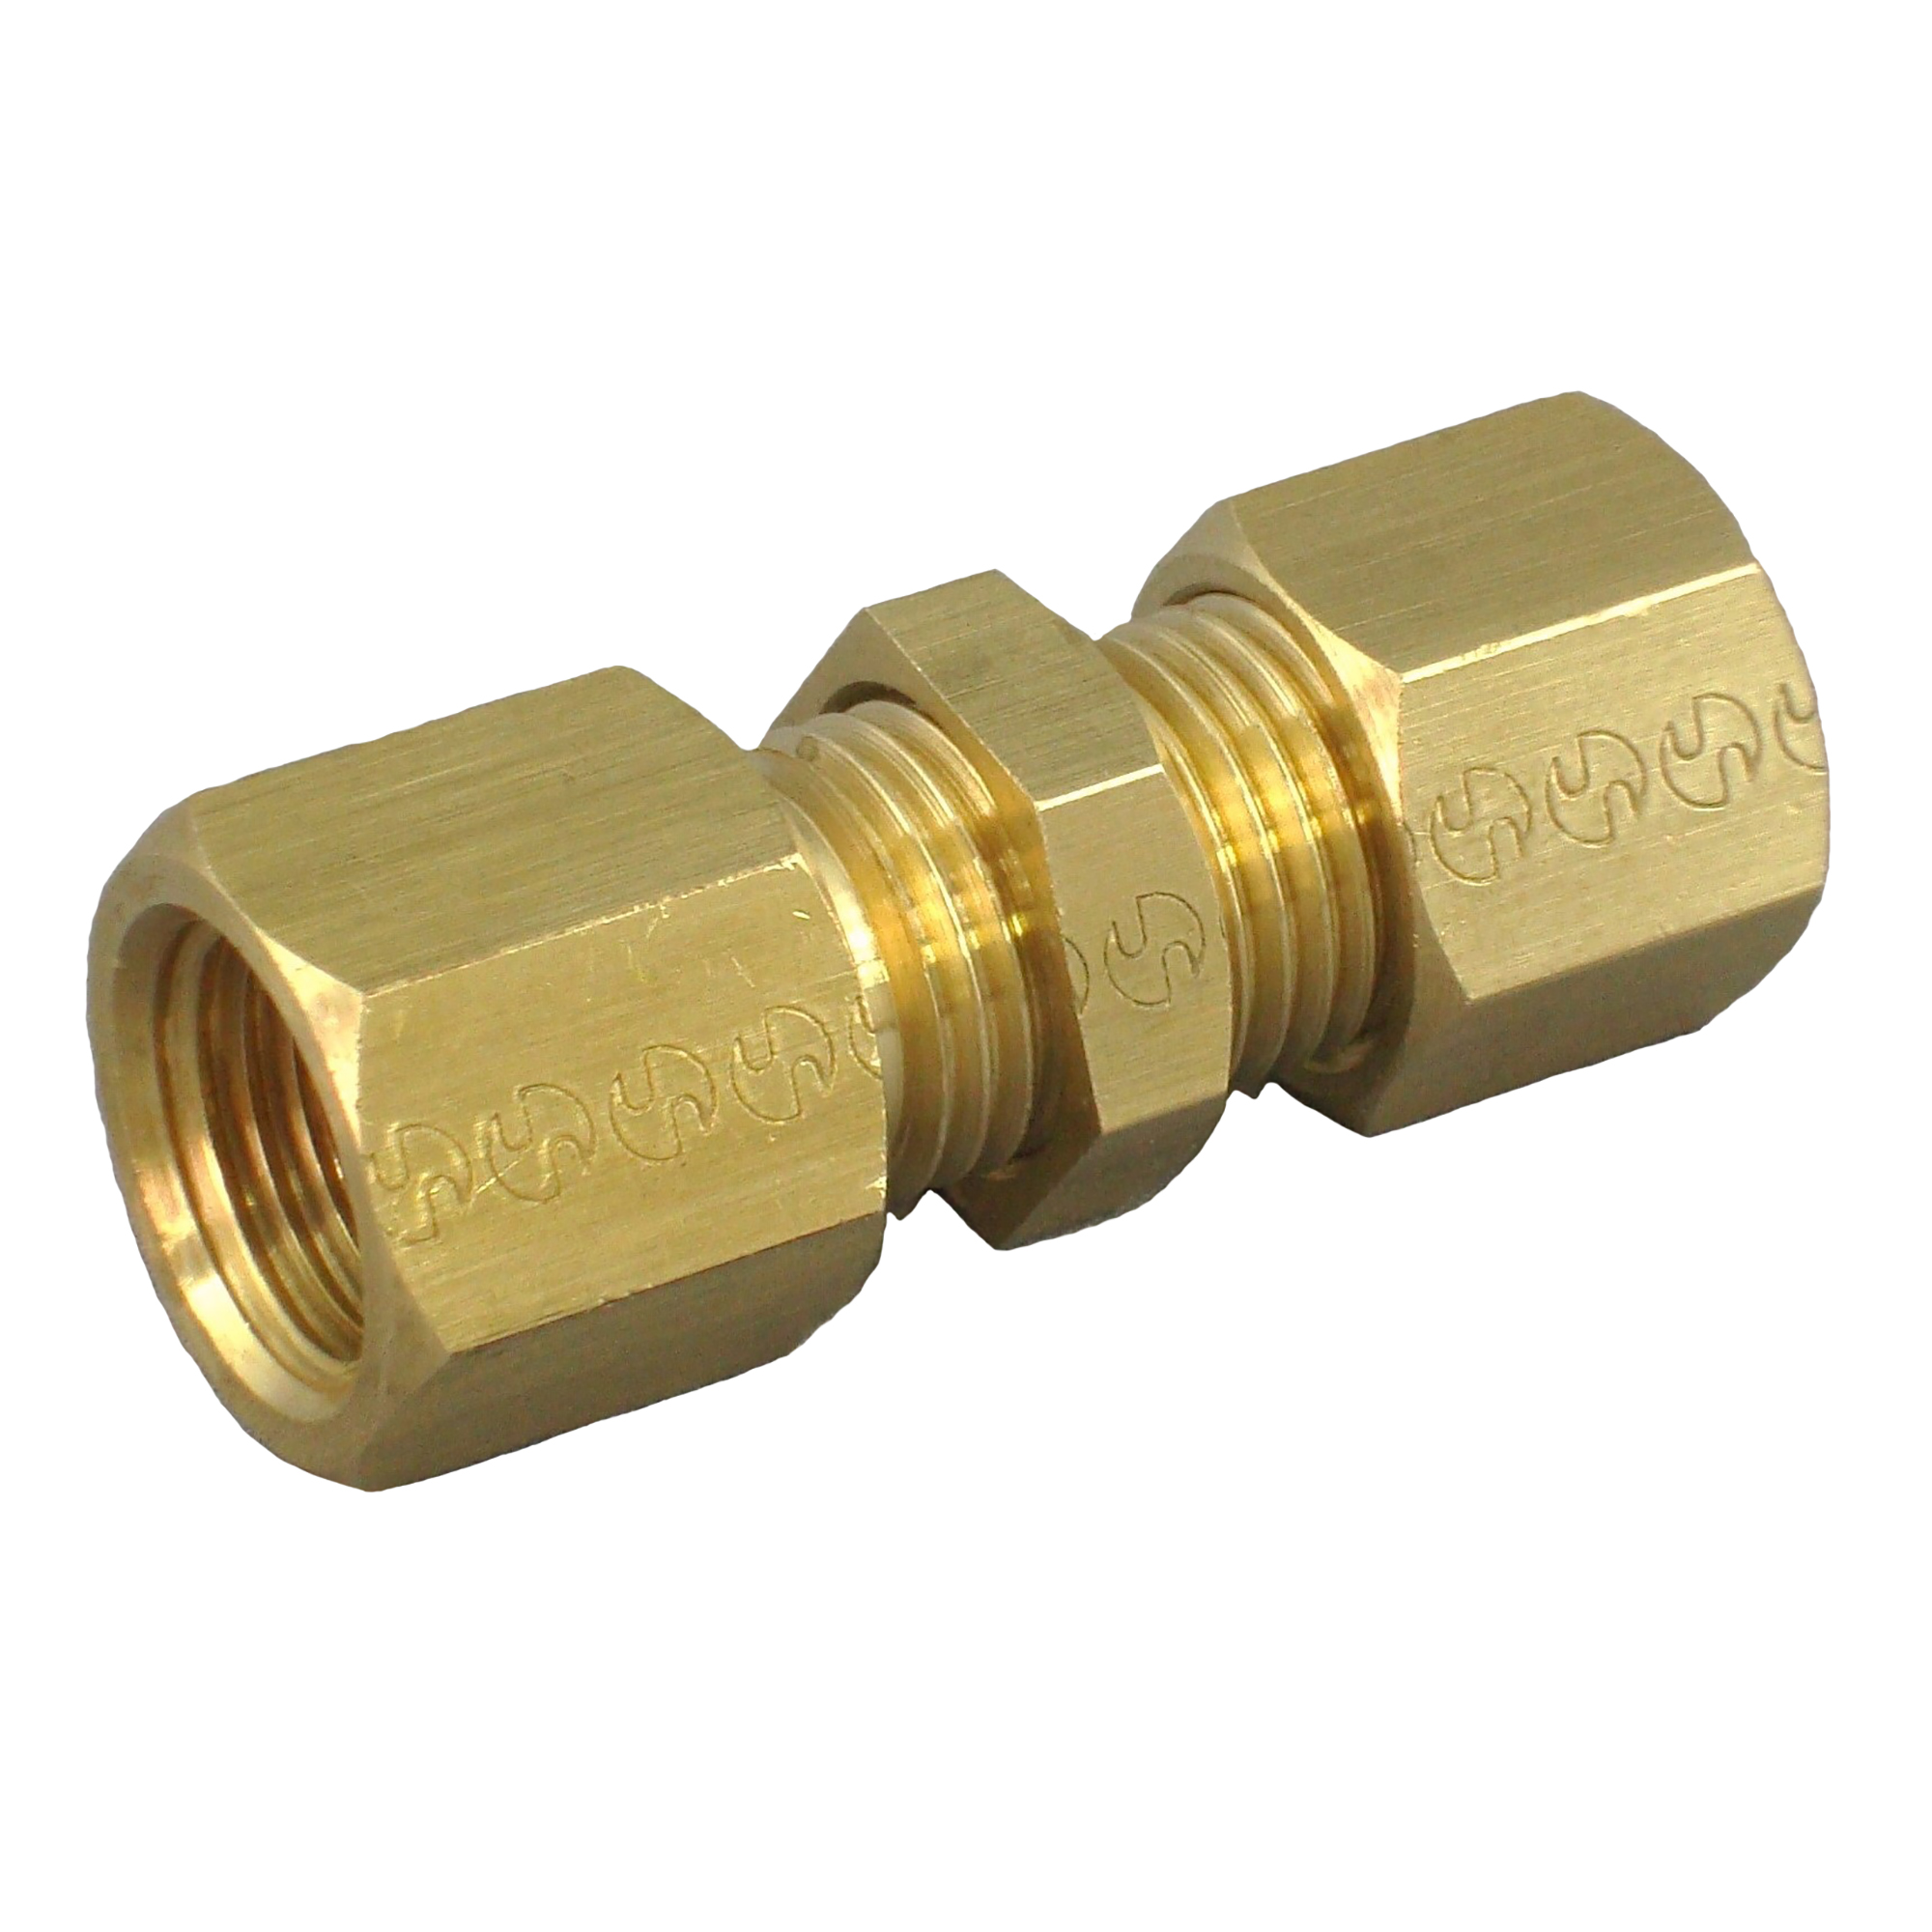 Straight Connector - Bulkhead, Brass, Compression Ring Fitting, Female BSPT, RFB Series